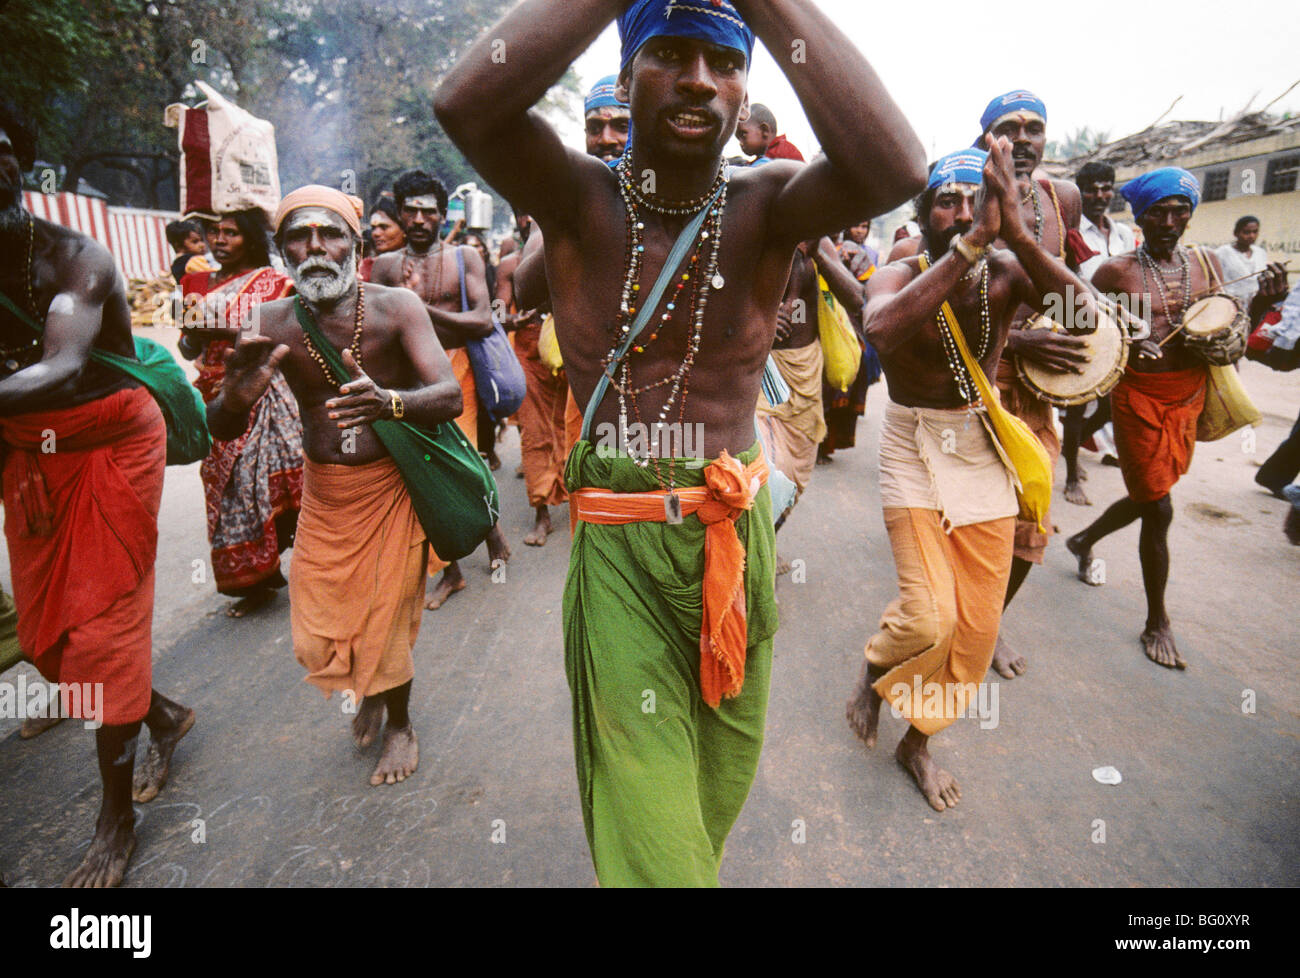 A group of devotees and pilgrims dance sing through the streets of Palani Tamil Nadu during the annual Hindu Thaipusam festival Stock Photo